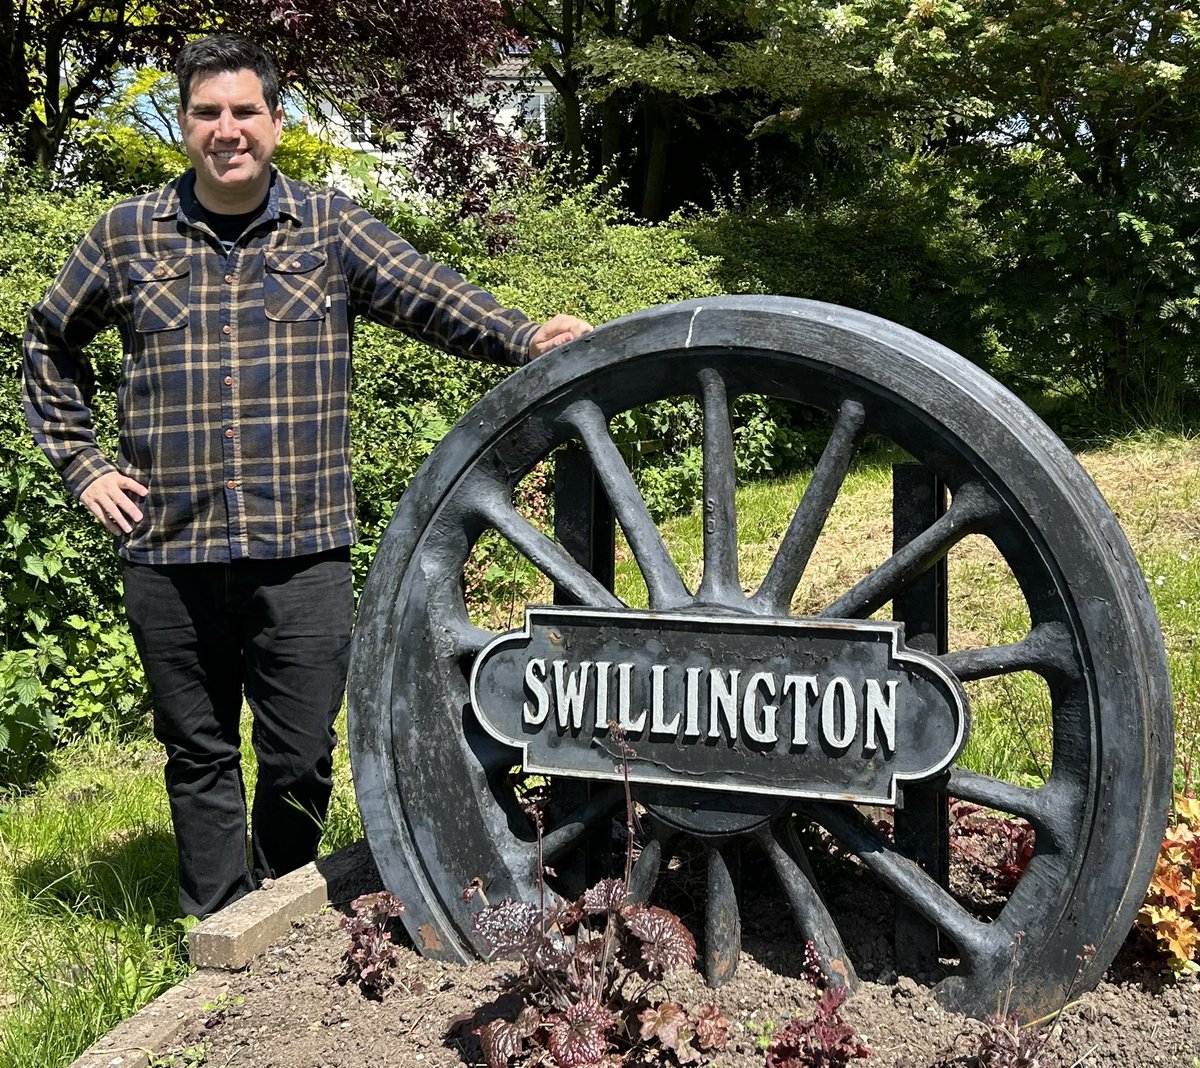 Due to constituency boundary changes, in the General Election Leeds East constituency will include Swillington. I’m proud to be your Labour candidate. Swillington has the chance to vote for a fresh start after 14 years of a Conservative MP and a failing Conservative government.